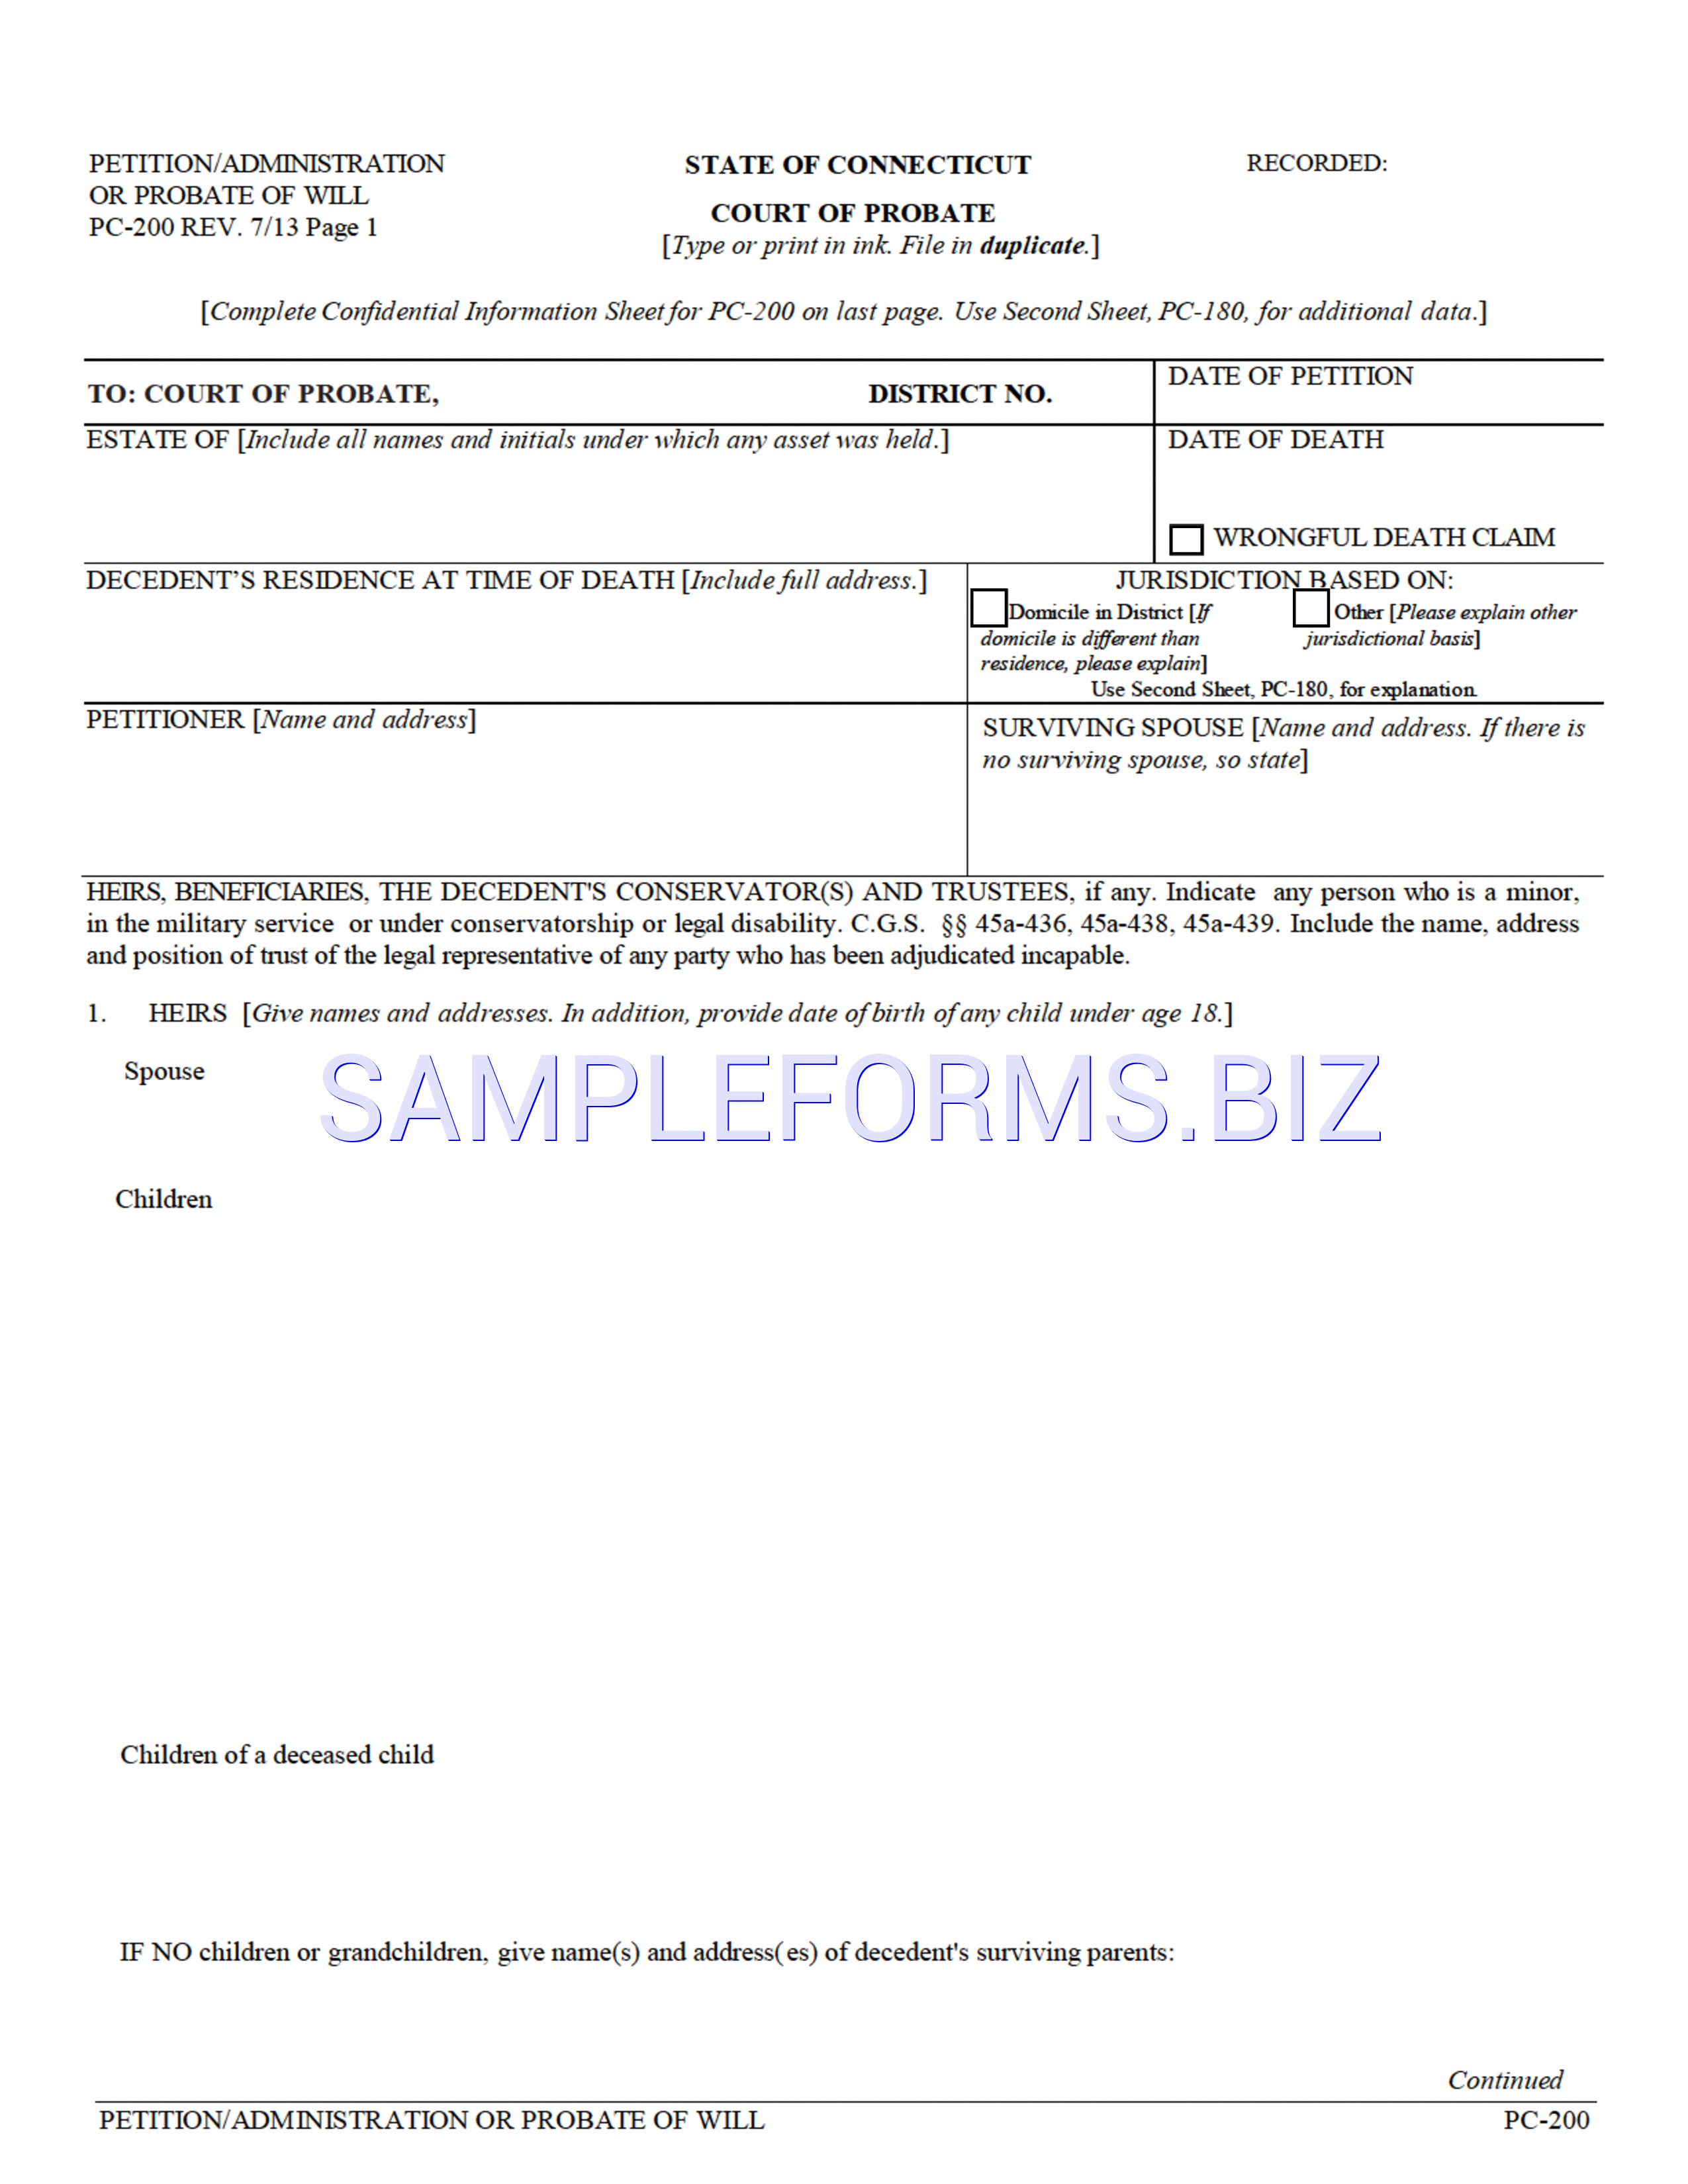 Preview free downloadable Petition/Administration or Probate of Will (Rev. 7/13) in PDF (page 1)